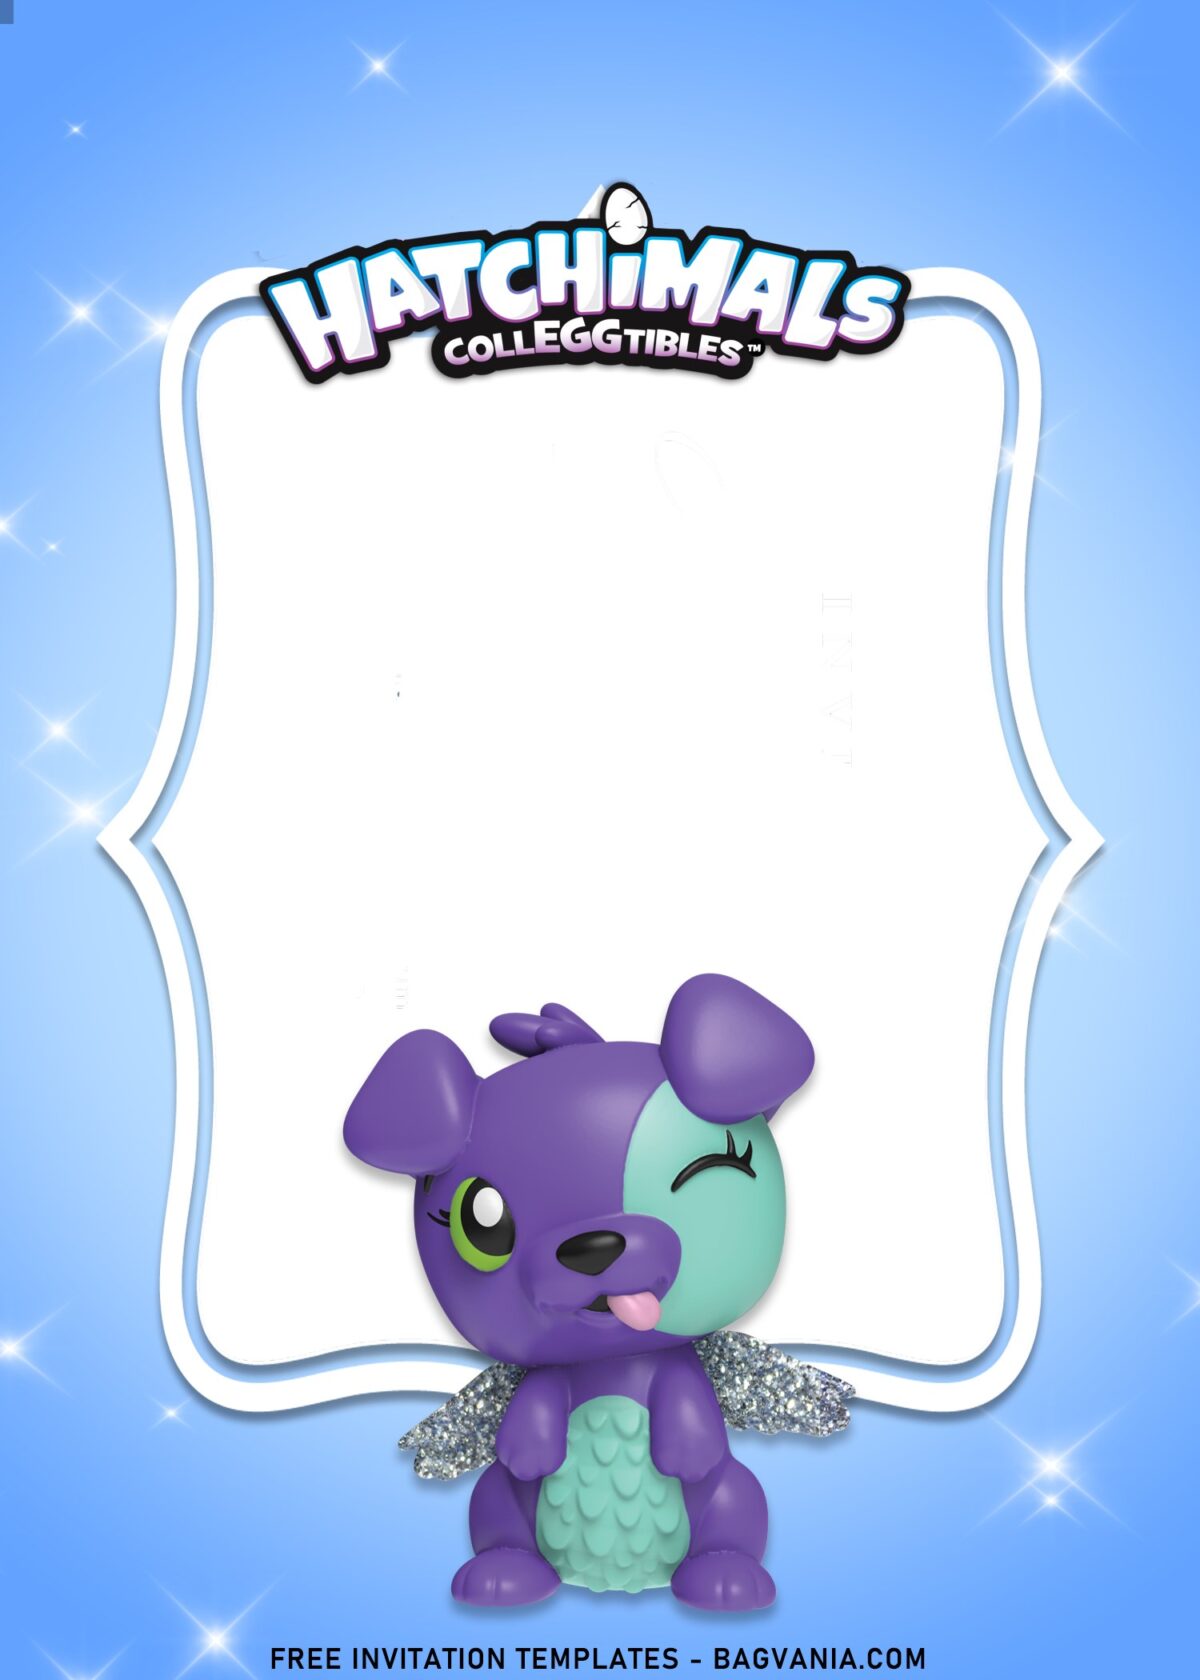 7+ Twinkly Cute Hatchimals Birthday Invitation Templates with adorable Puppy Hatchimals